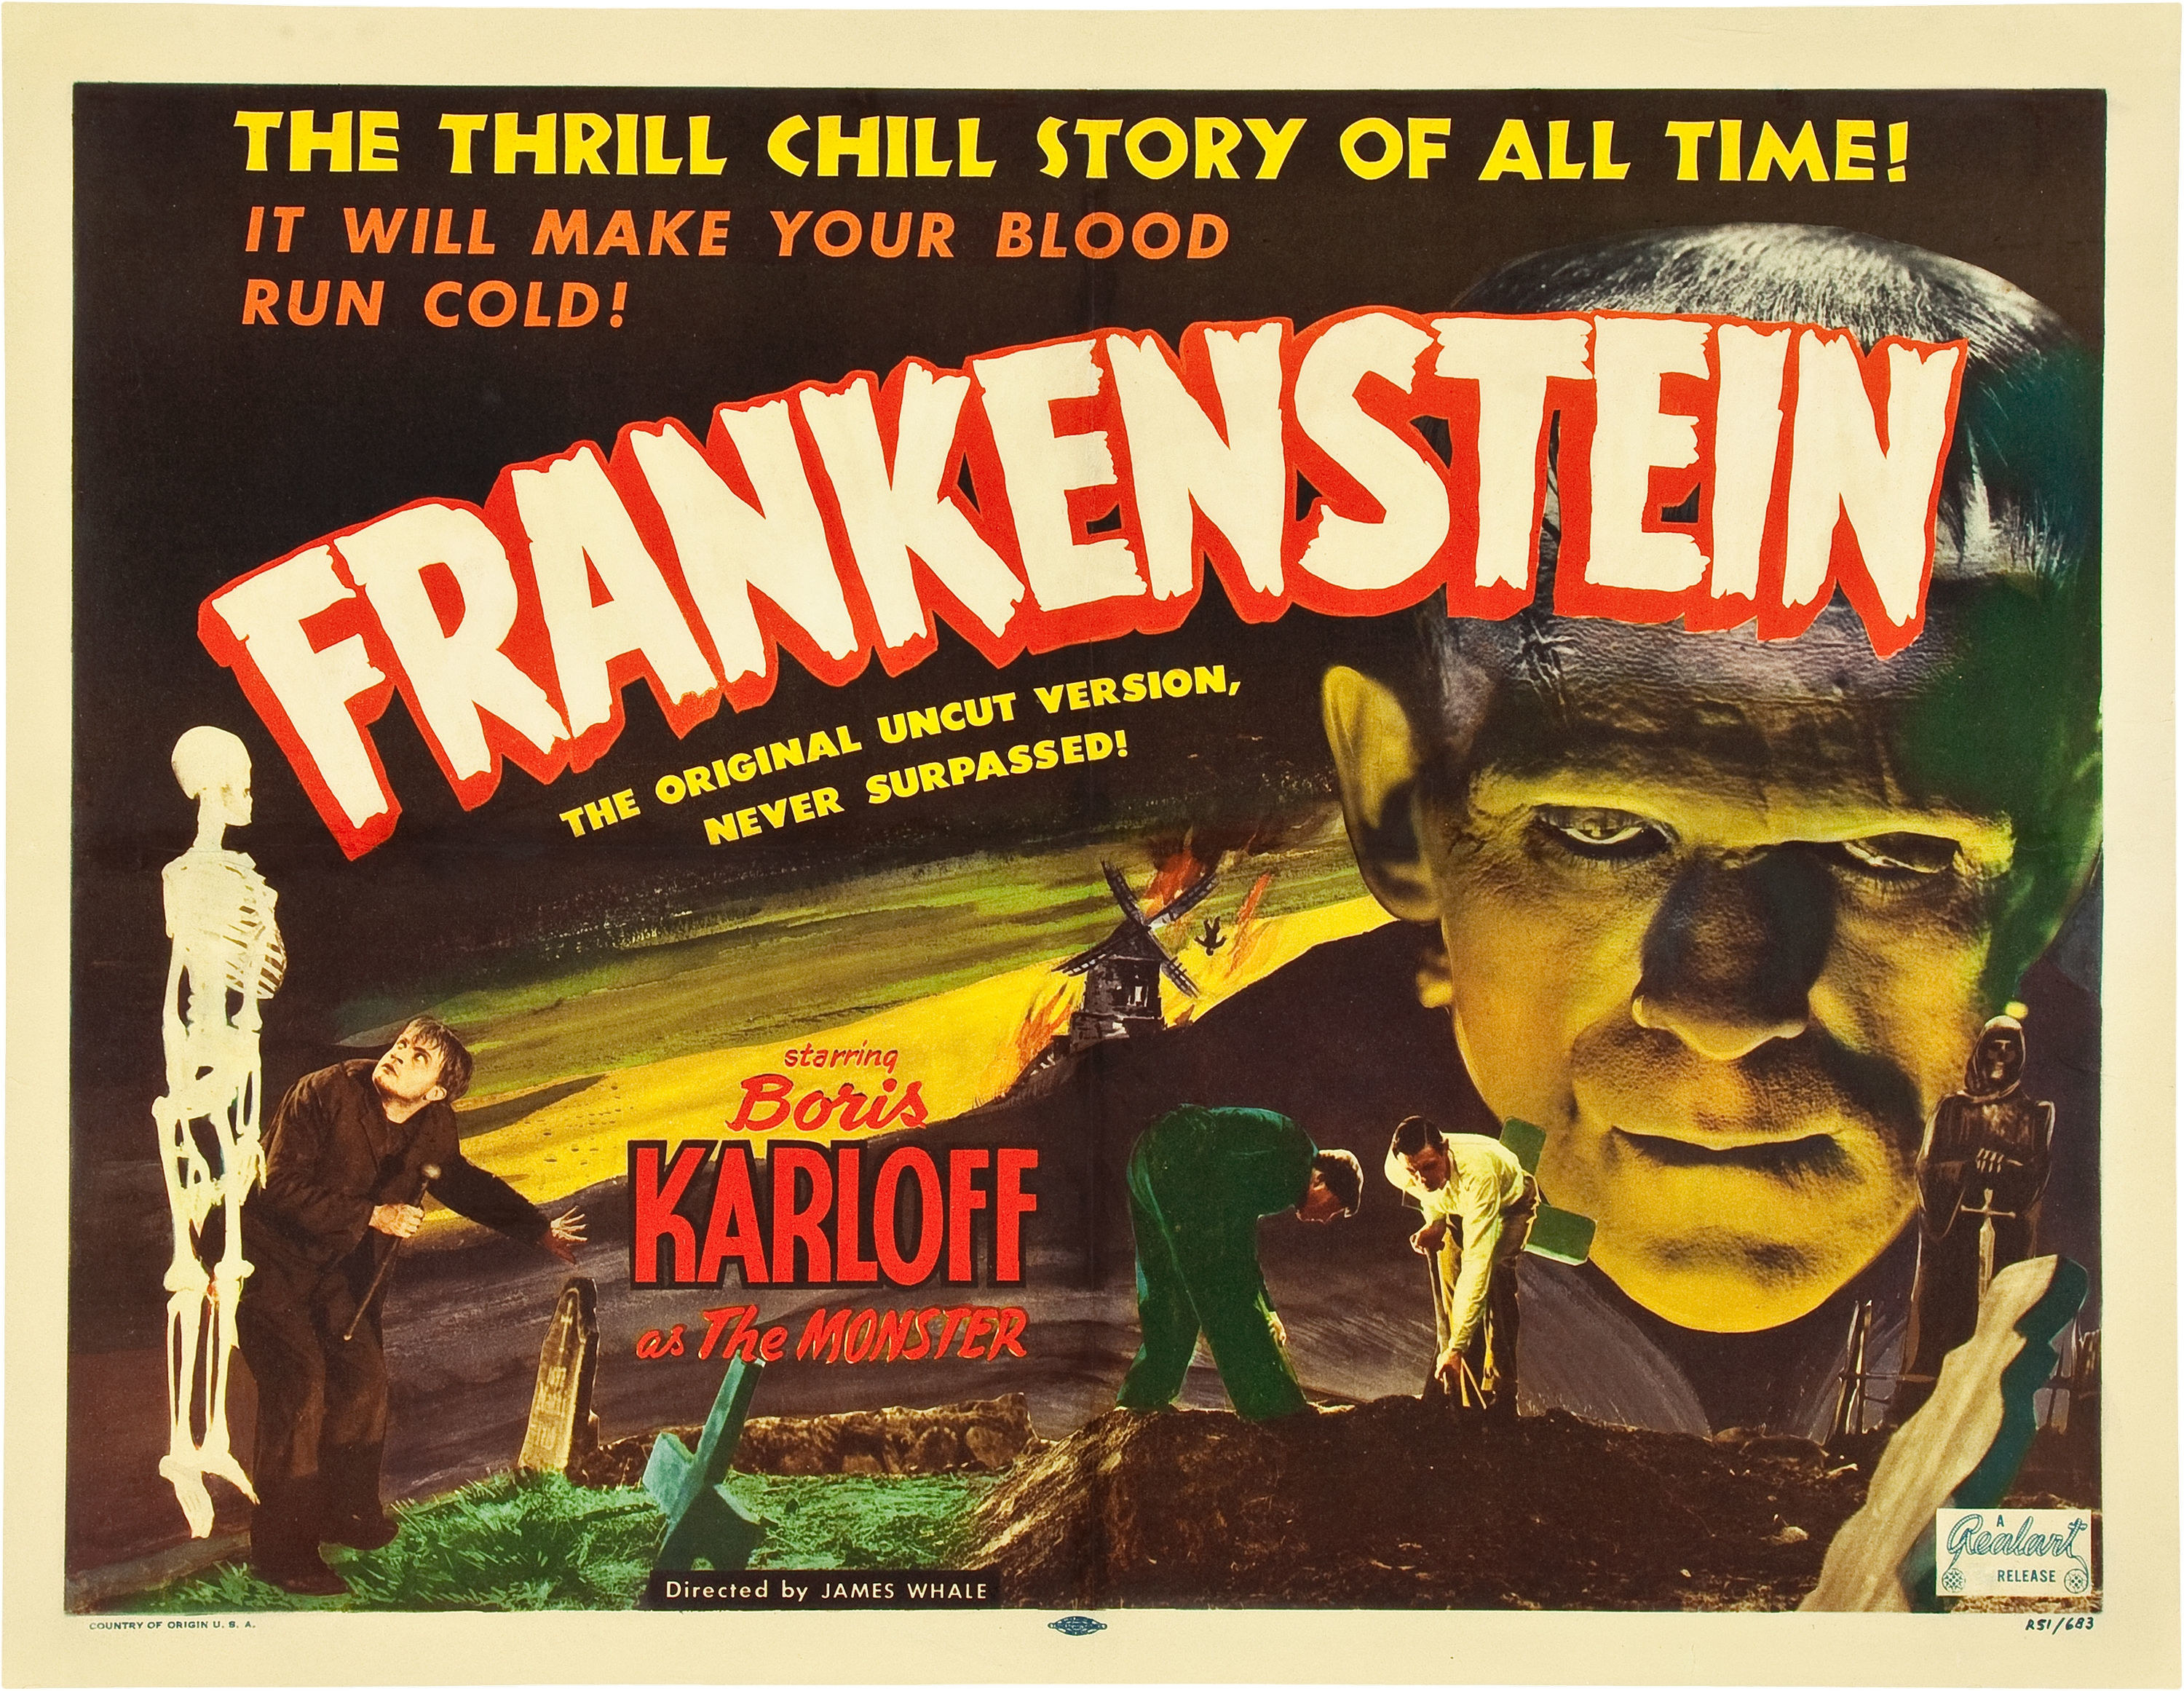 A movie poster for Frankenstein that in large text says &quot;Boris Karloff as The Monster&quot;